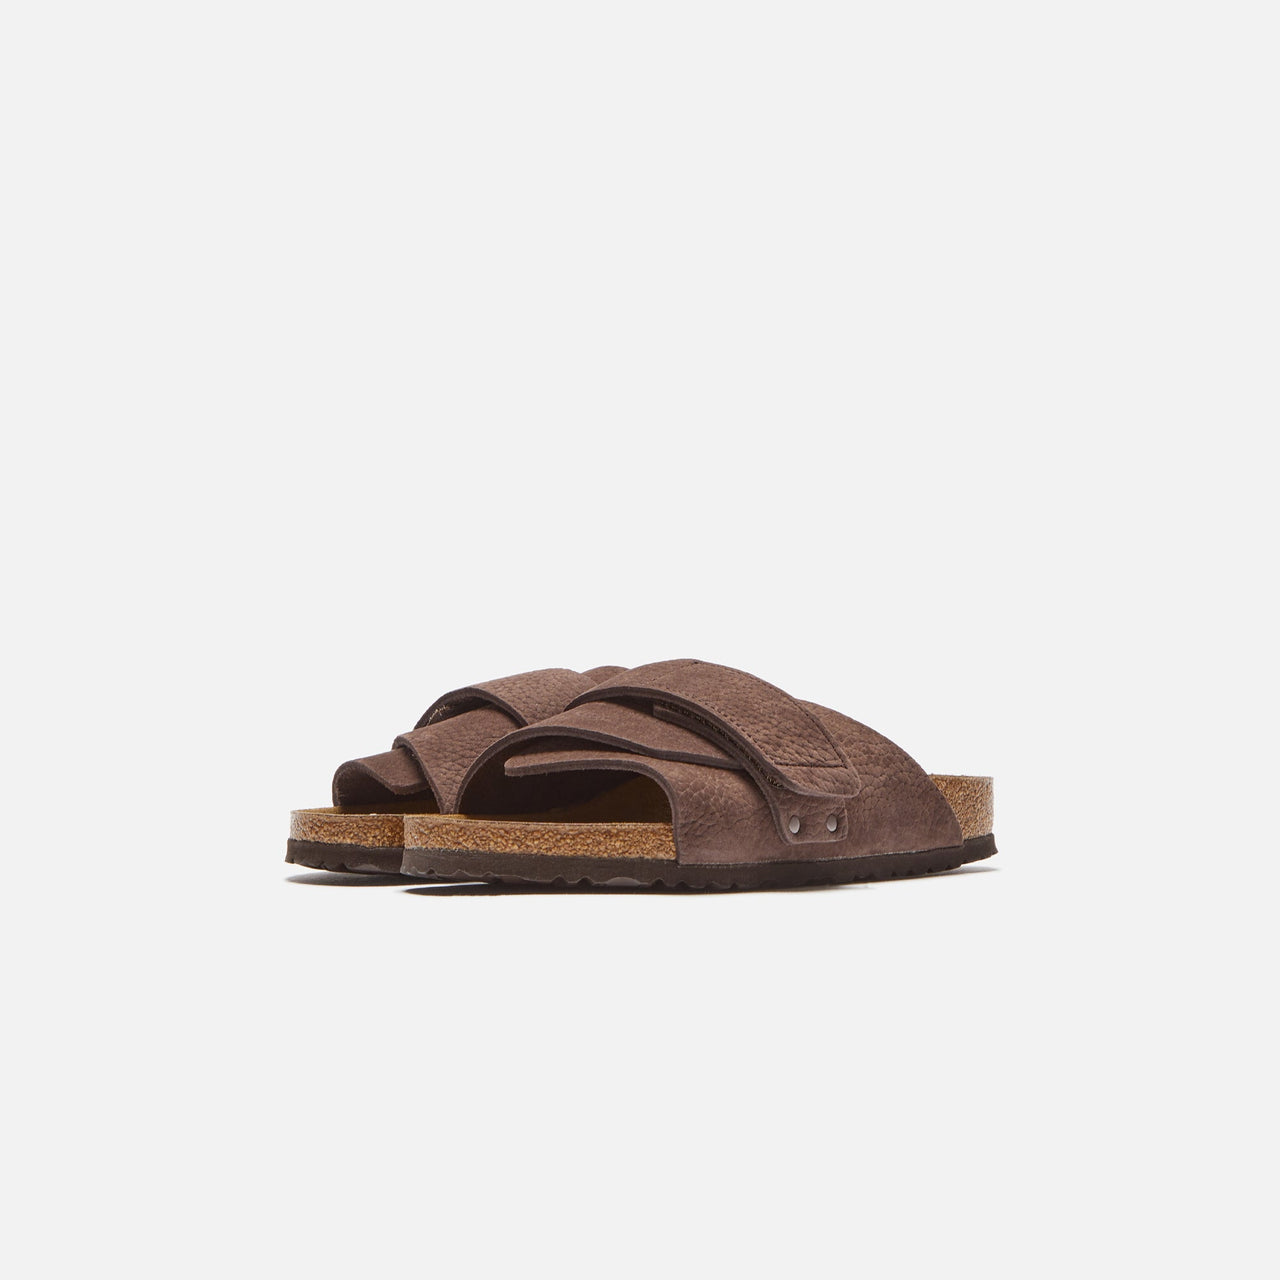 Alt text: Birkenstock Kyoto Nubuck Roast, a comfortable and stylish sandal made with high-quality nubuck leather in a rich roast color